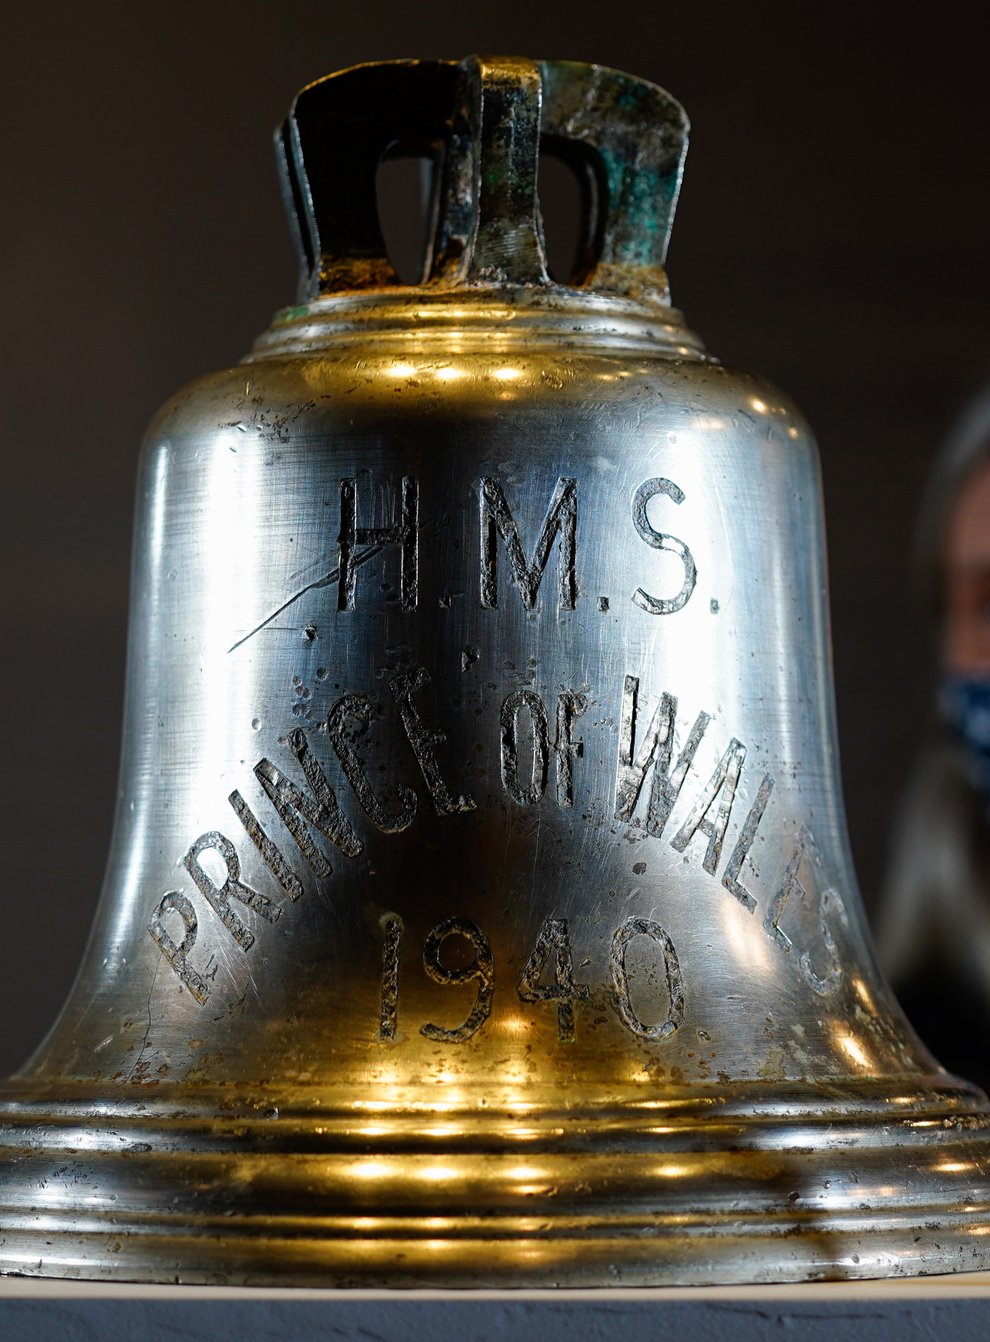 Victoria Ingles, senior curator at the National Museum of the Royal Navy, looks at the ship’s bell from HMS Prince of Wales which was sunk in the Second World War (Andrew Matthews/PA)